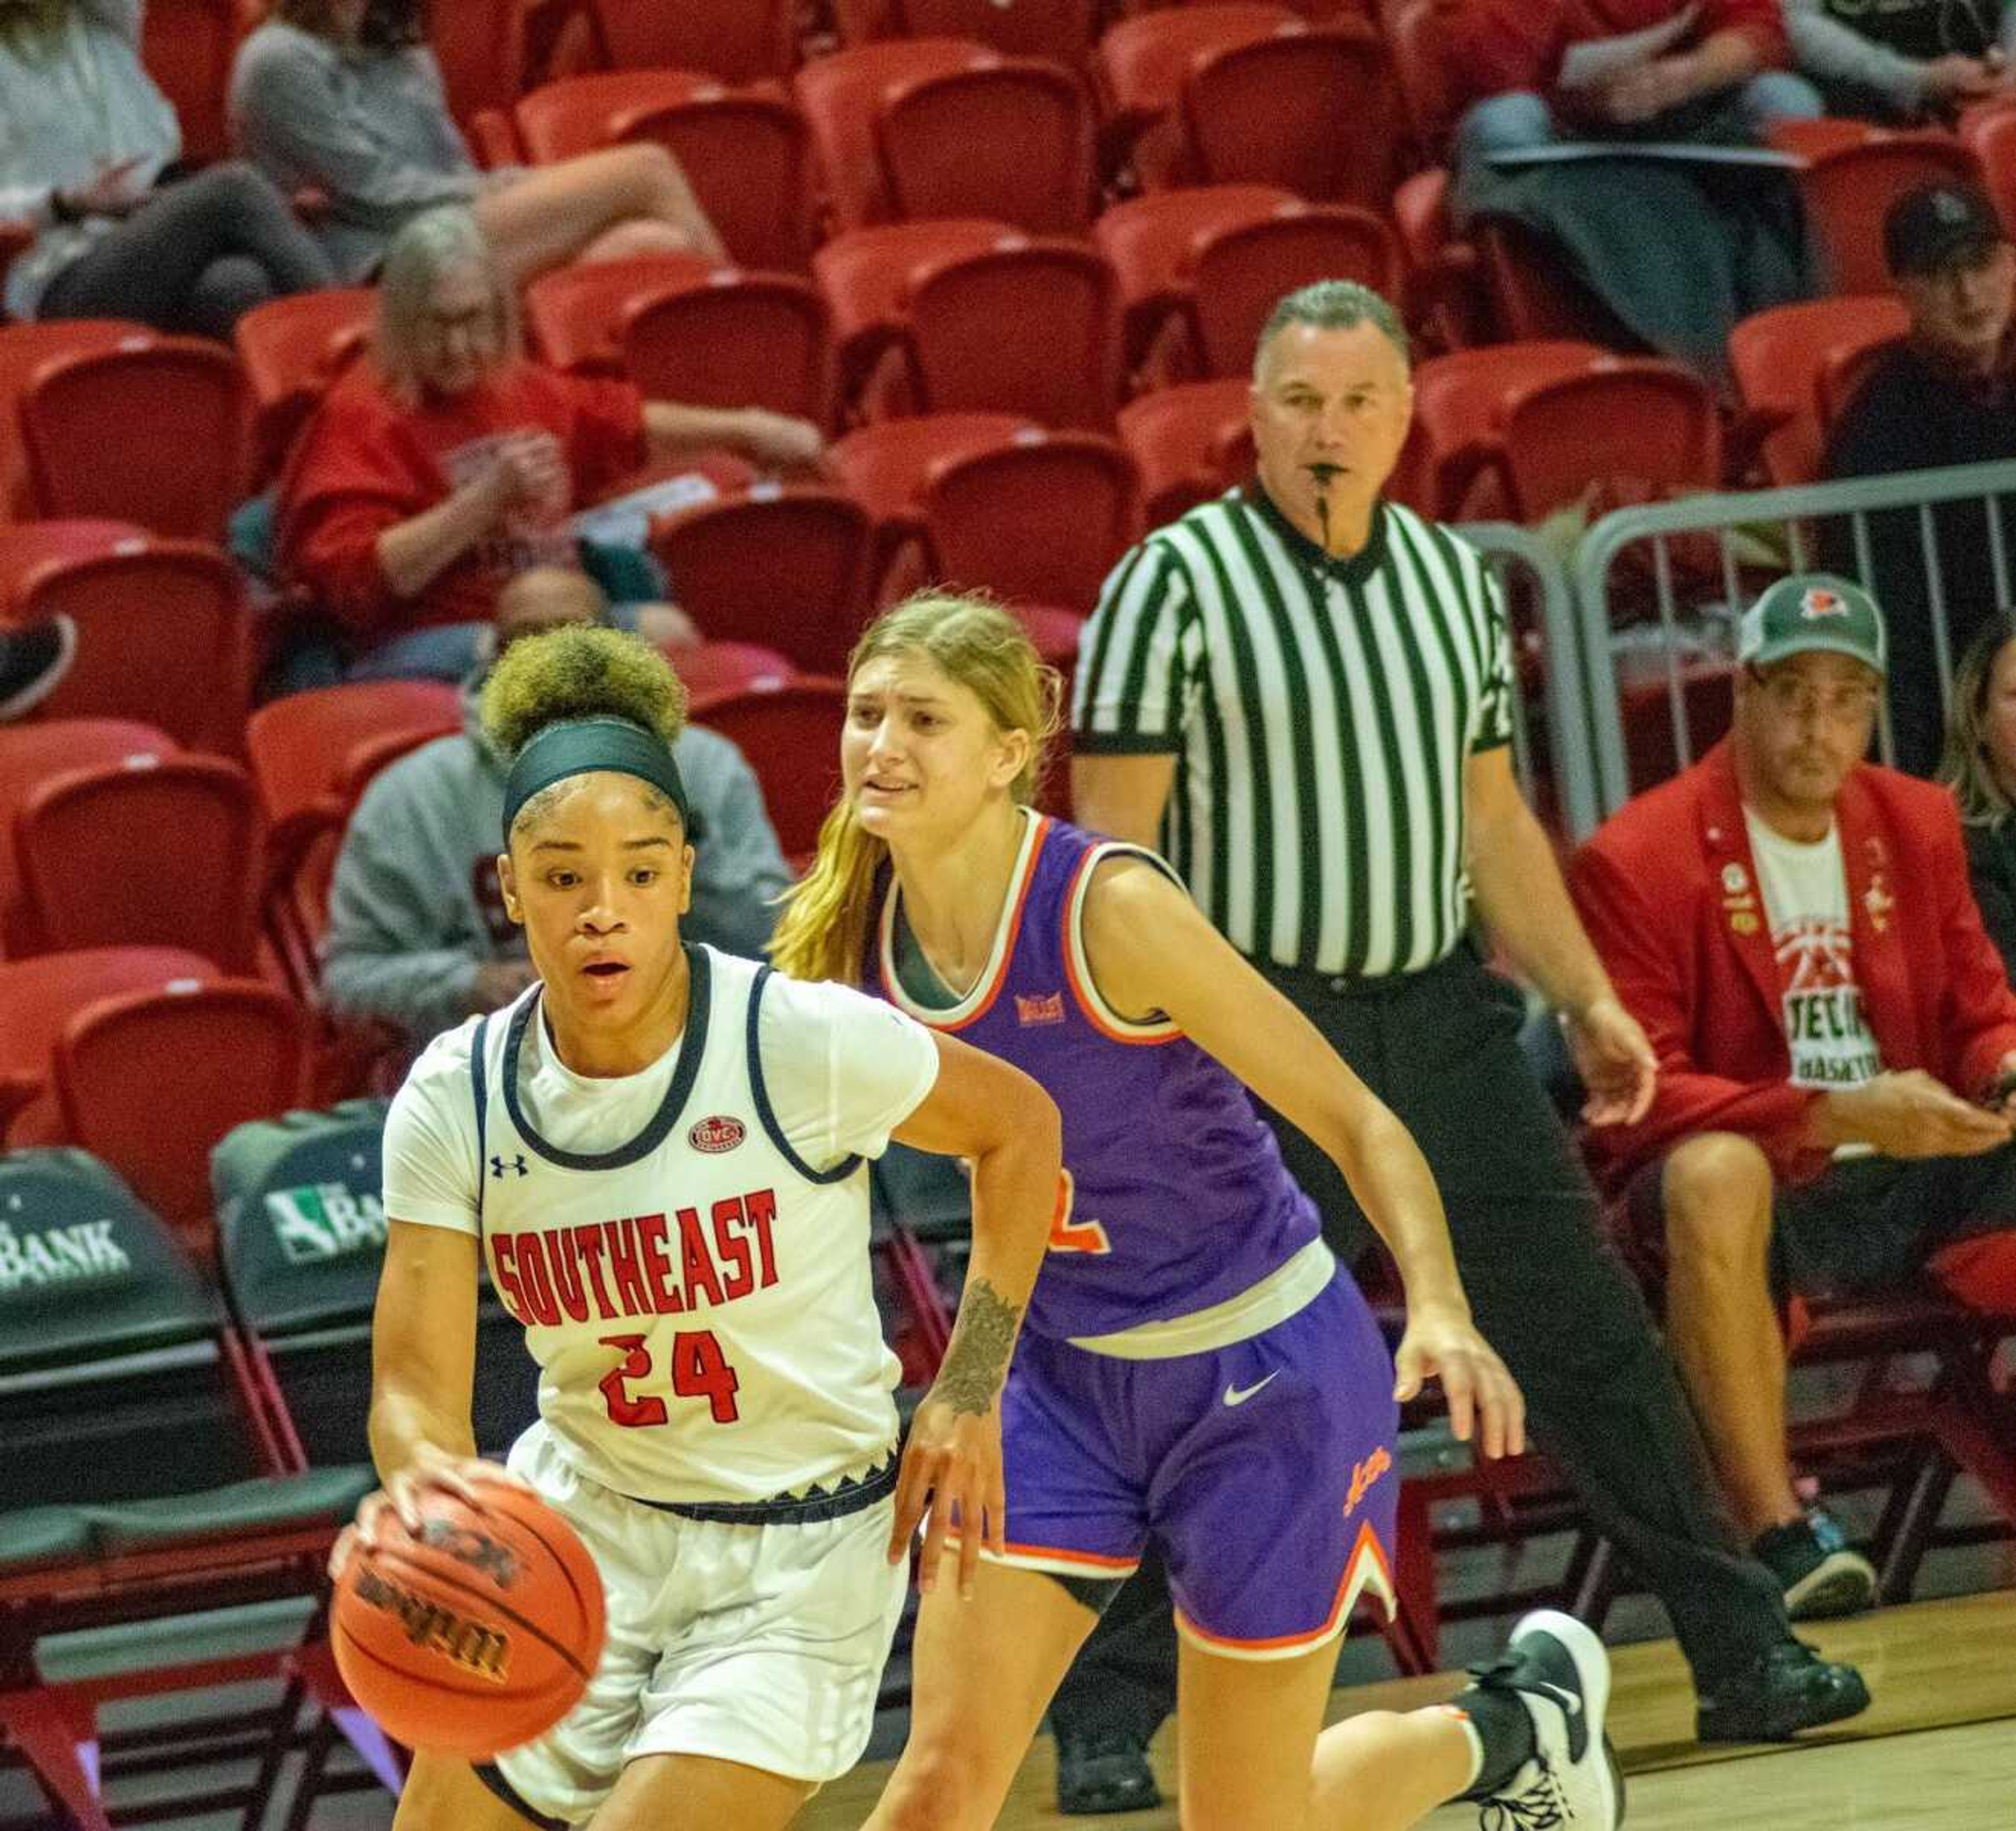 Women’s basketball jumps to 2-0 after defeating Evansville